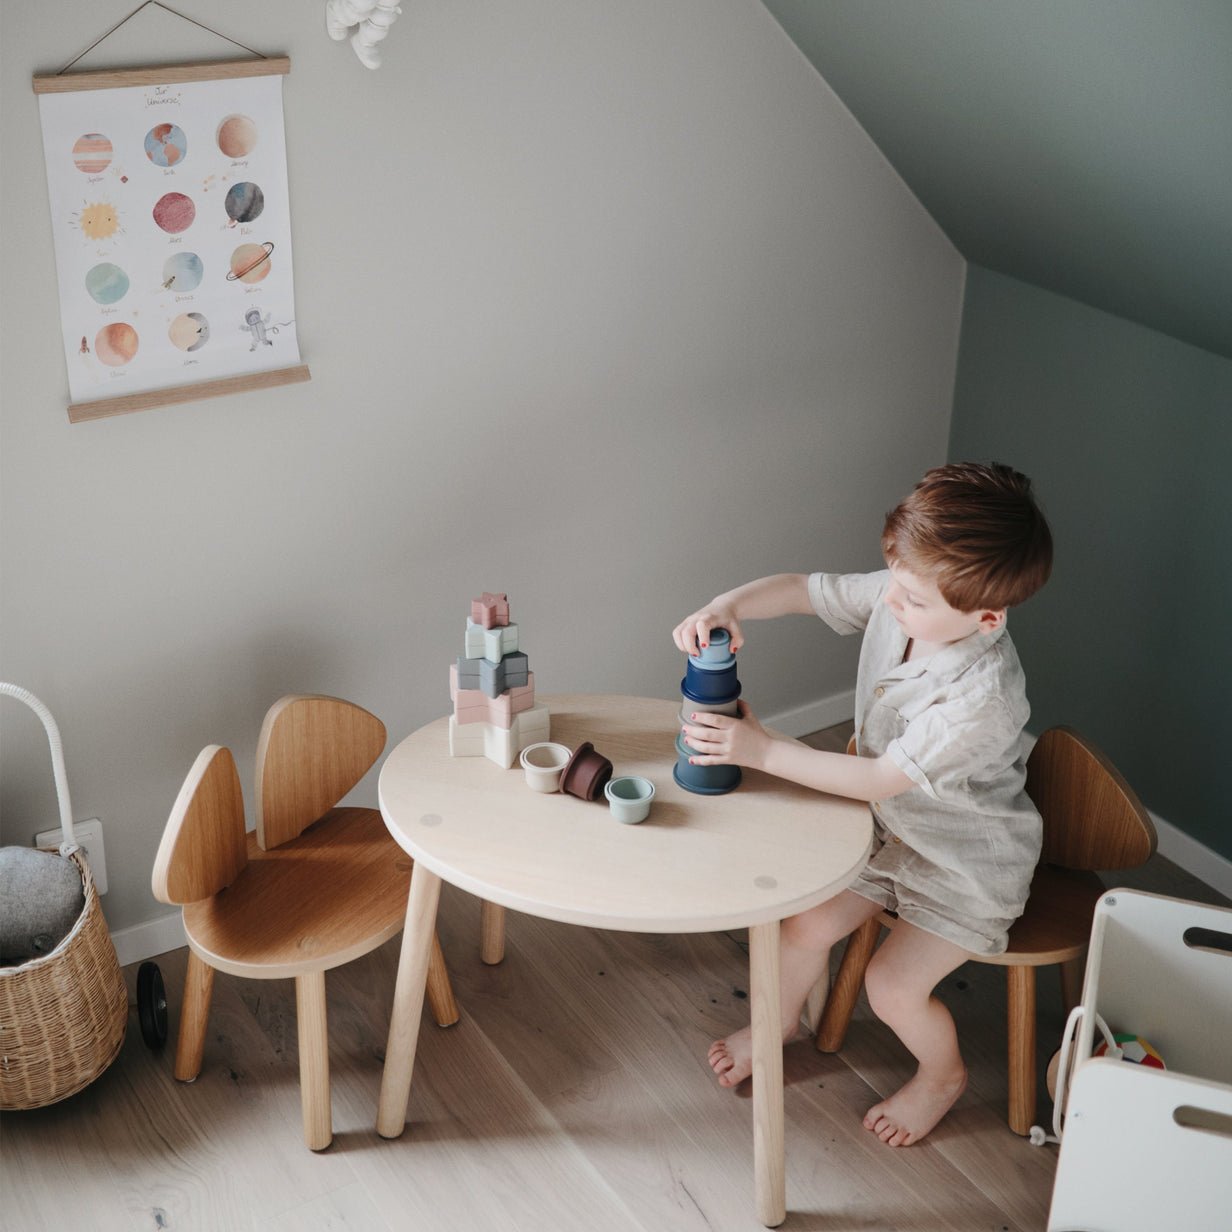 Mushie | Stacking Cups Toy - The Chic Habitat